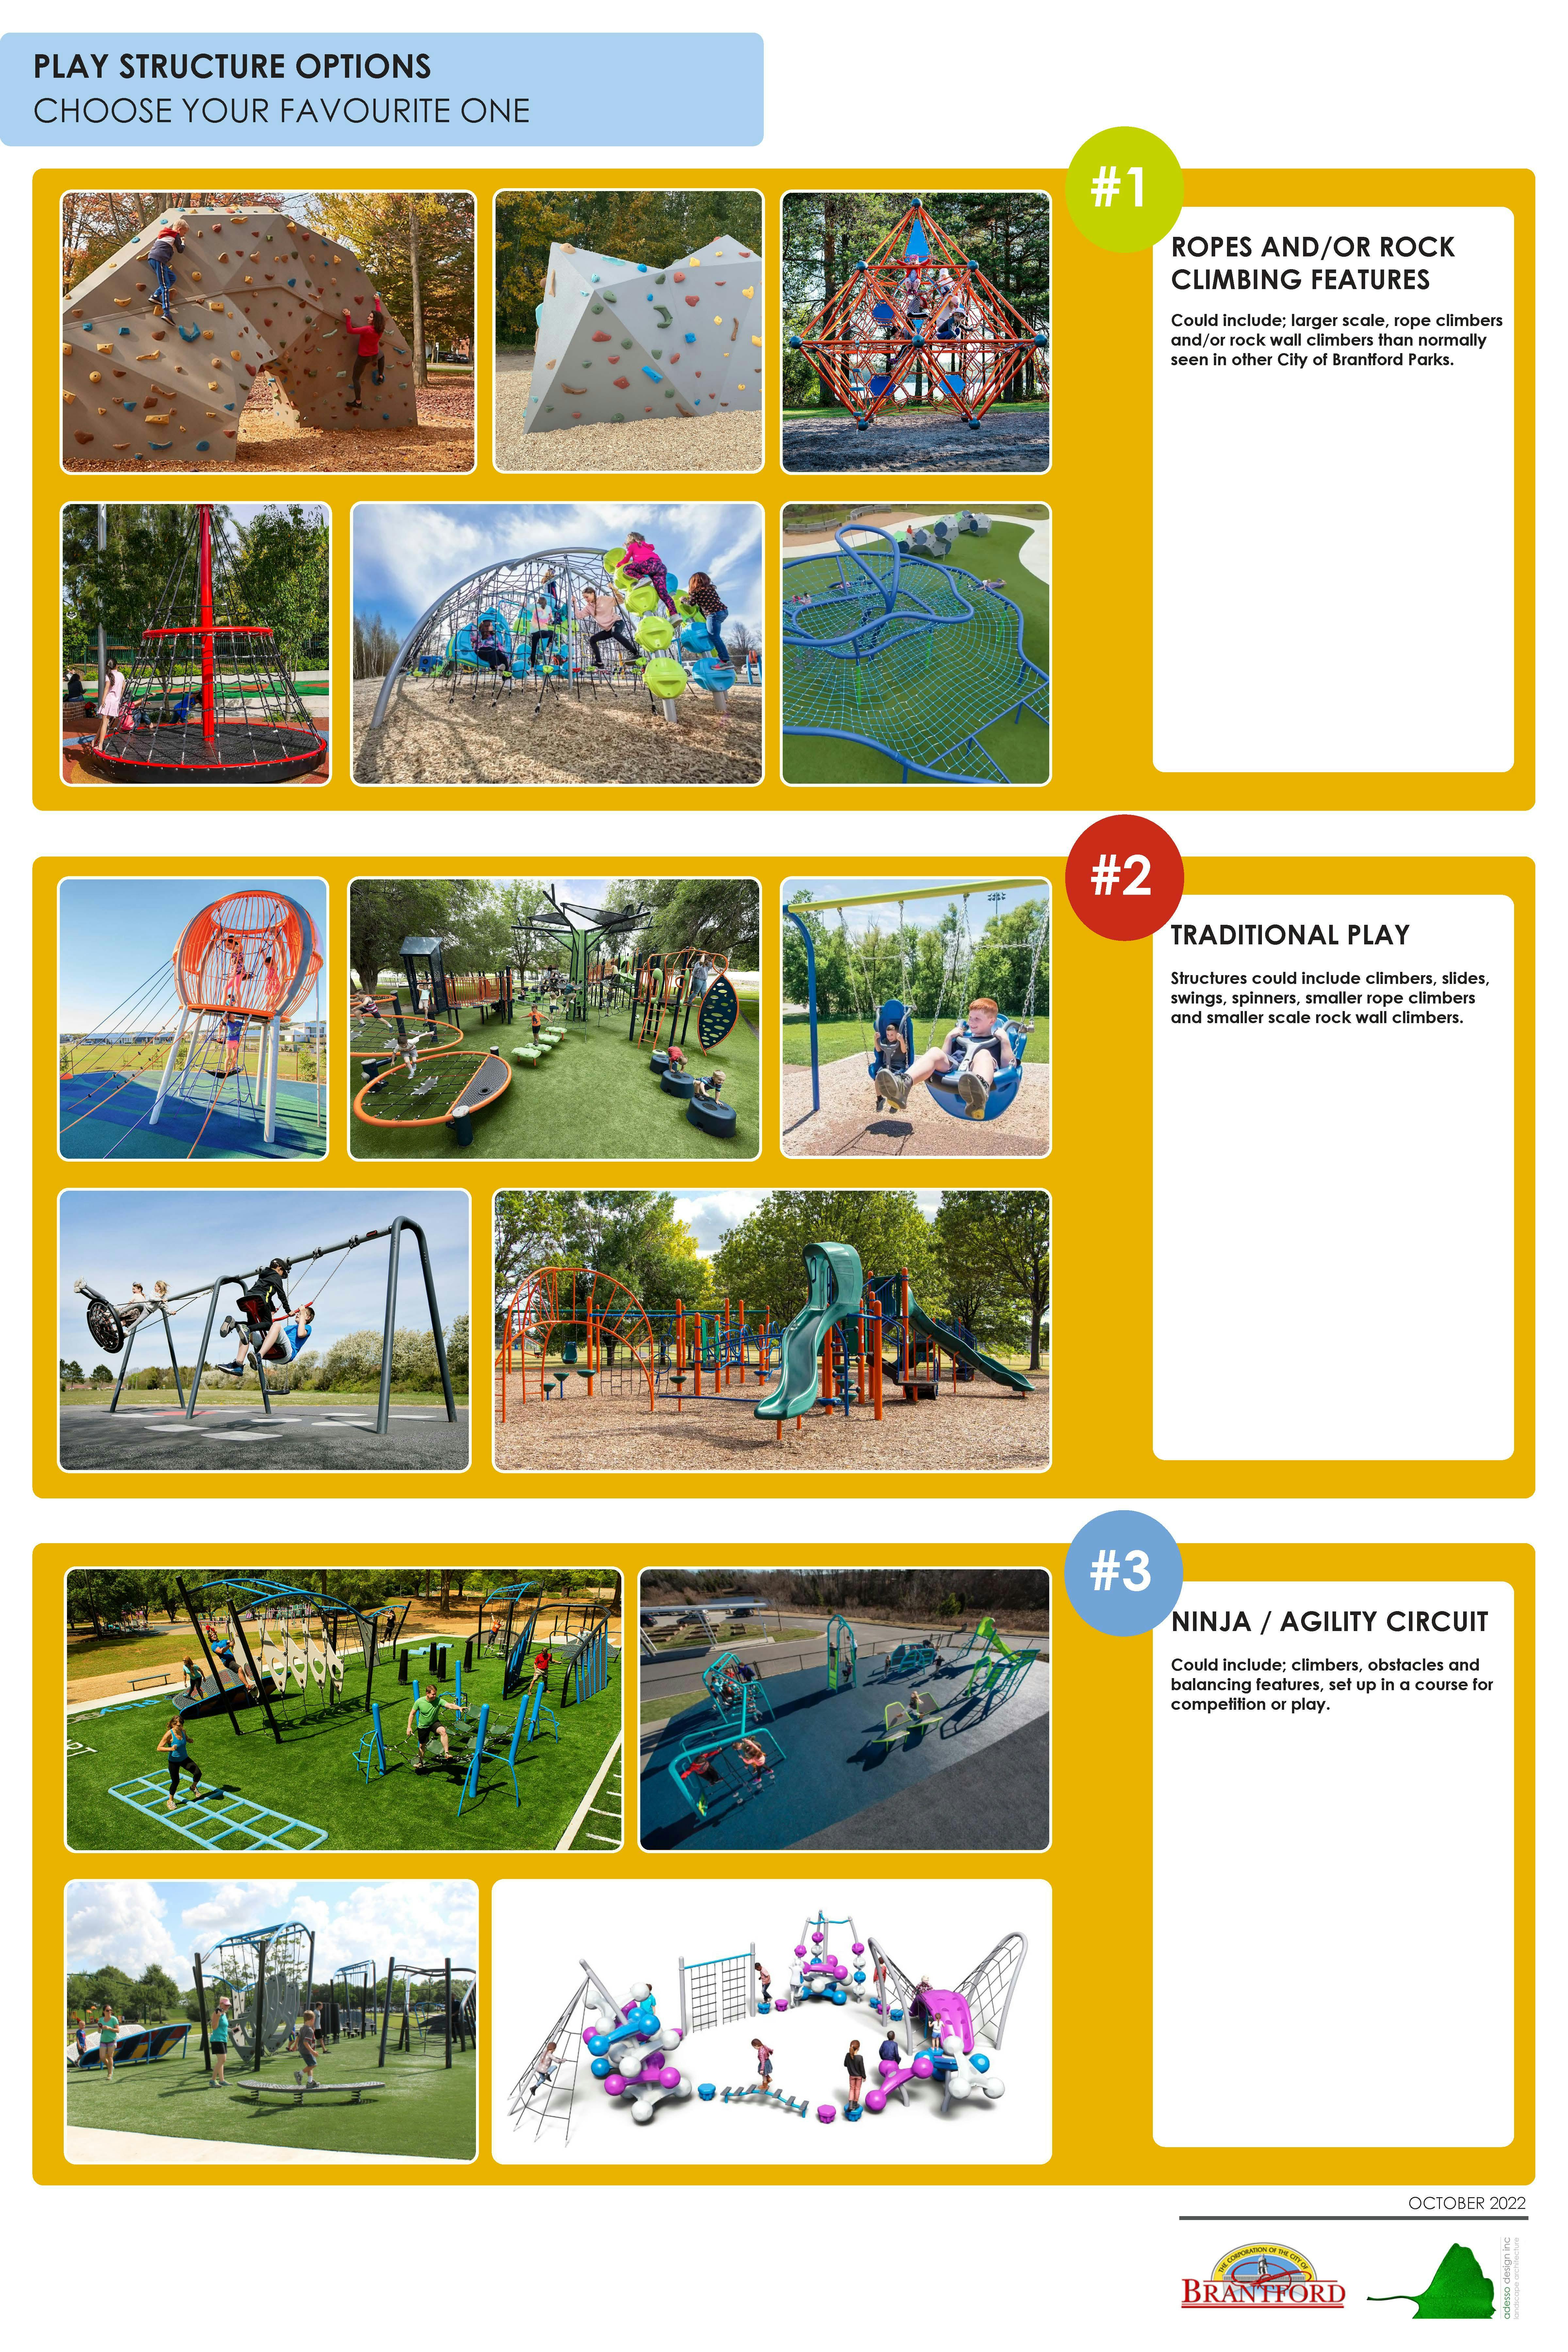 New playground structure options